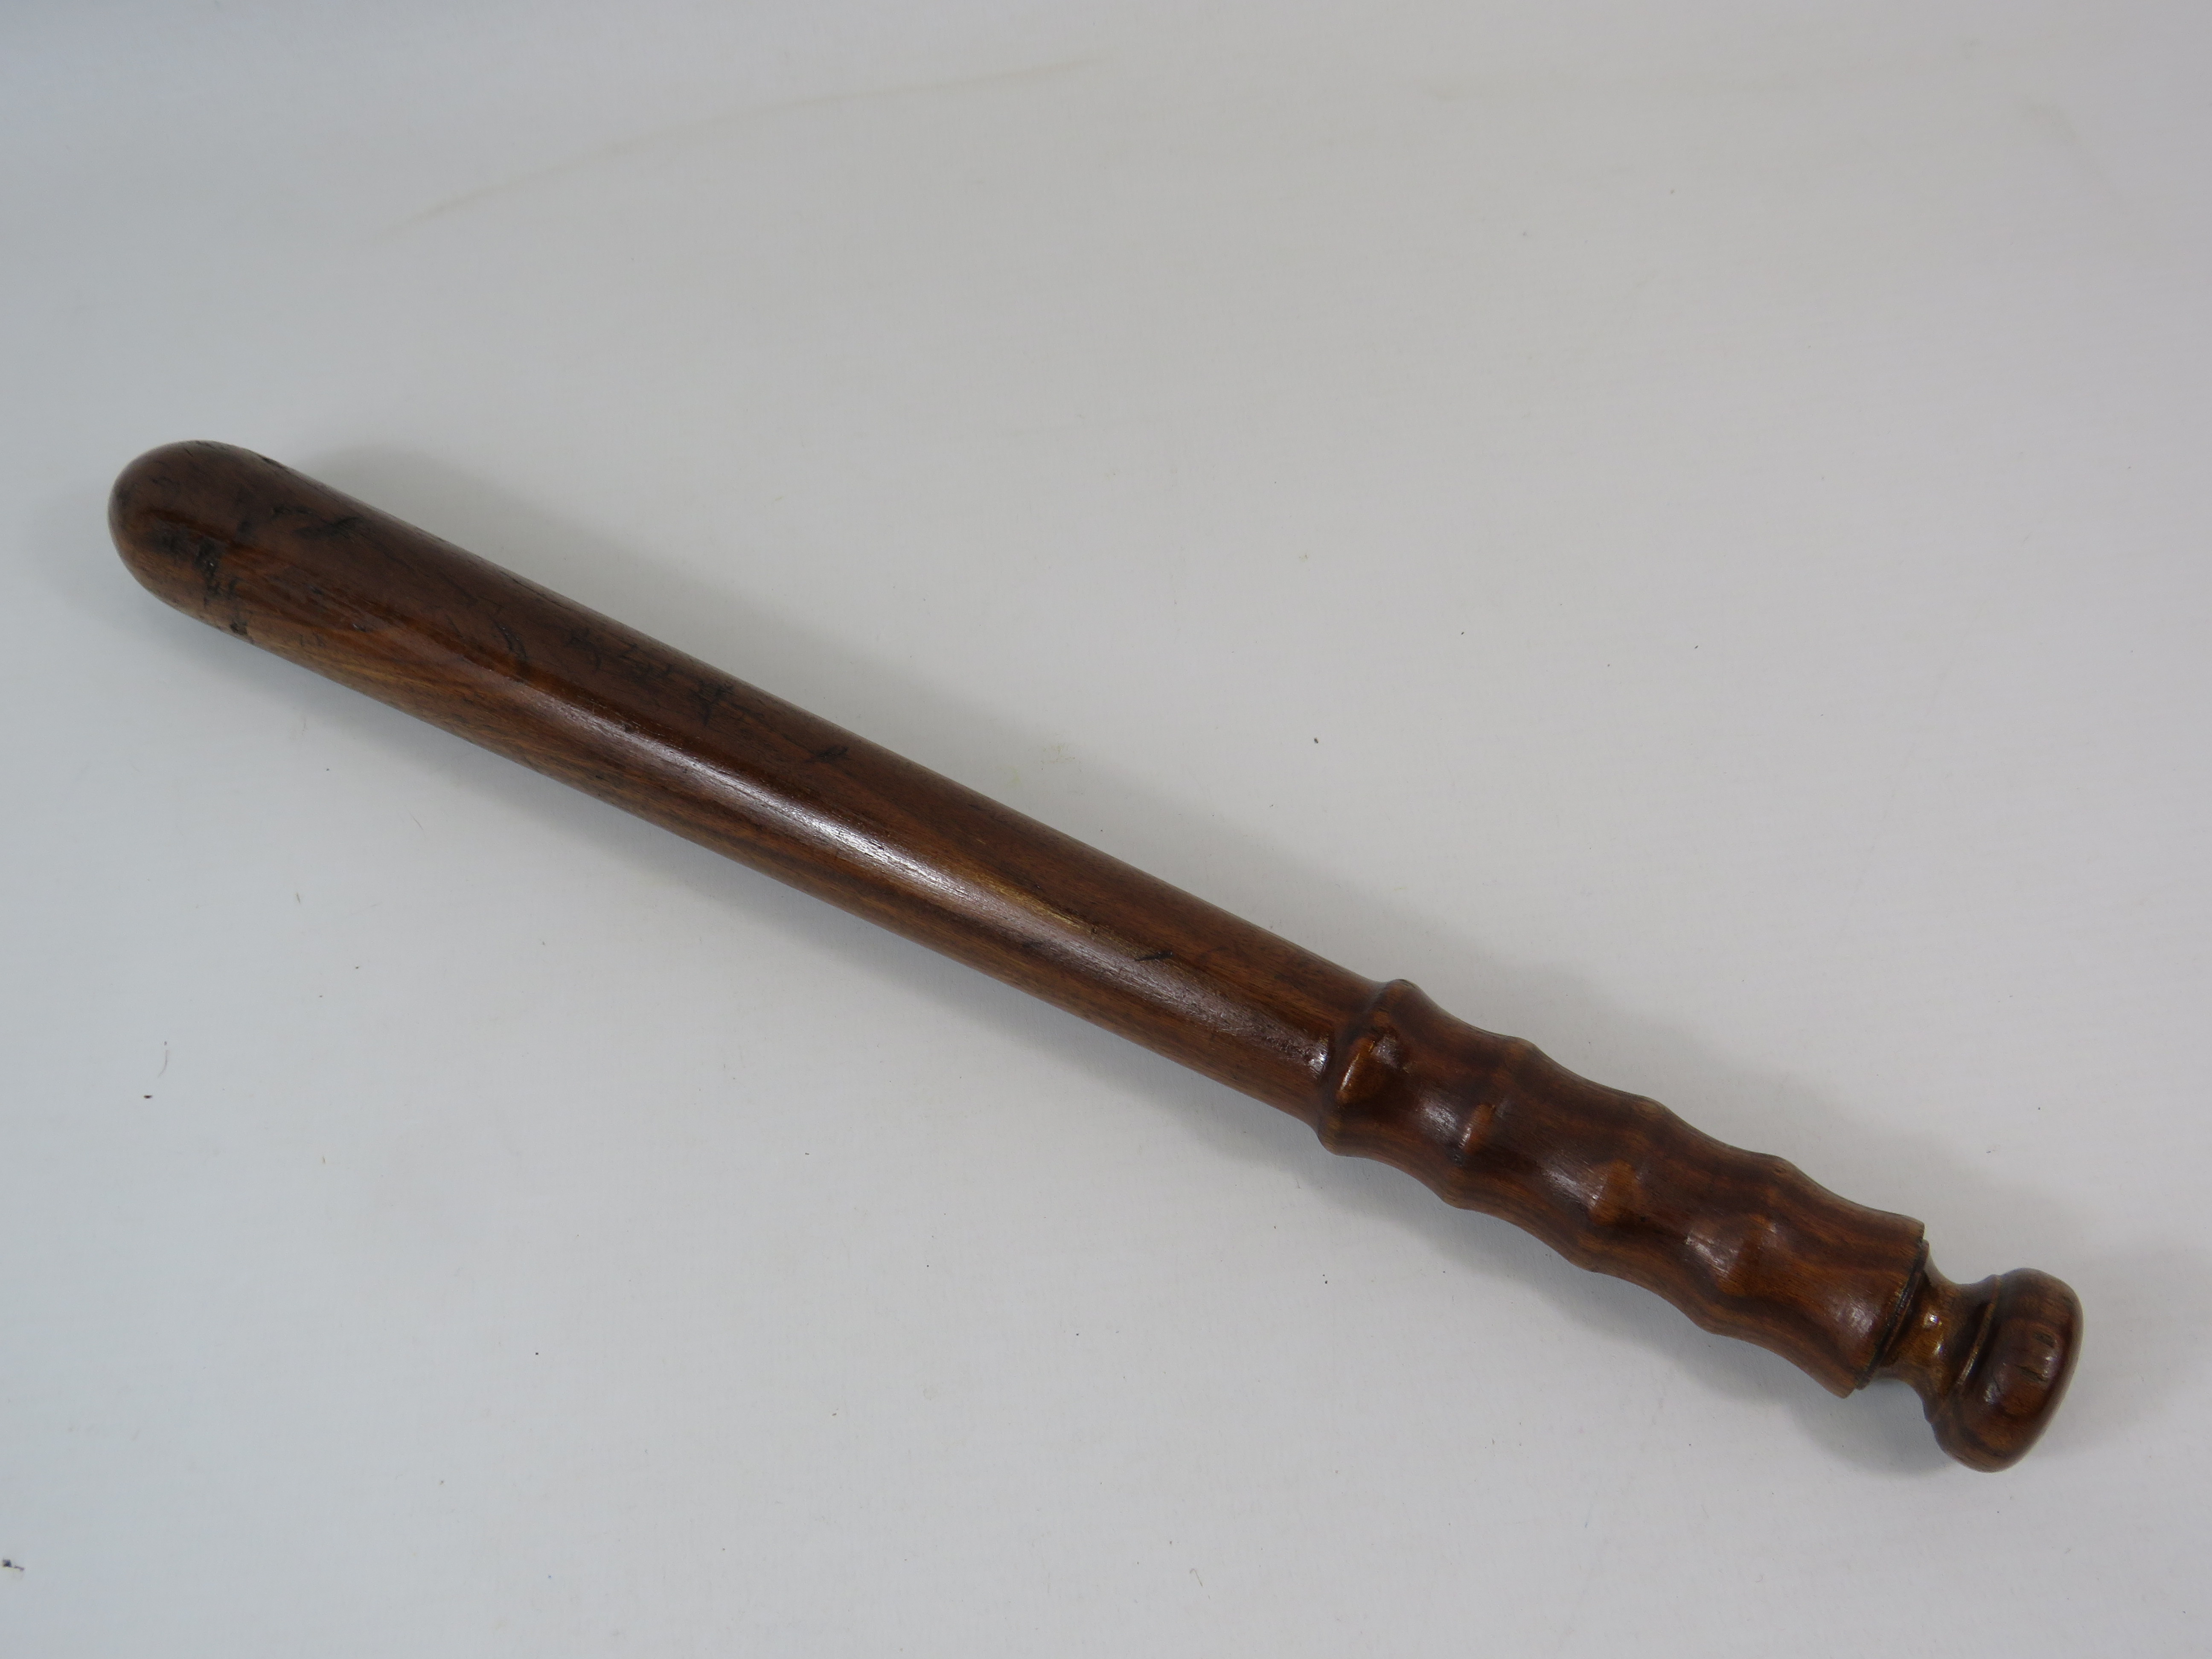 Military issue wooden truncheon.